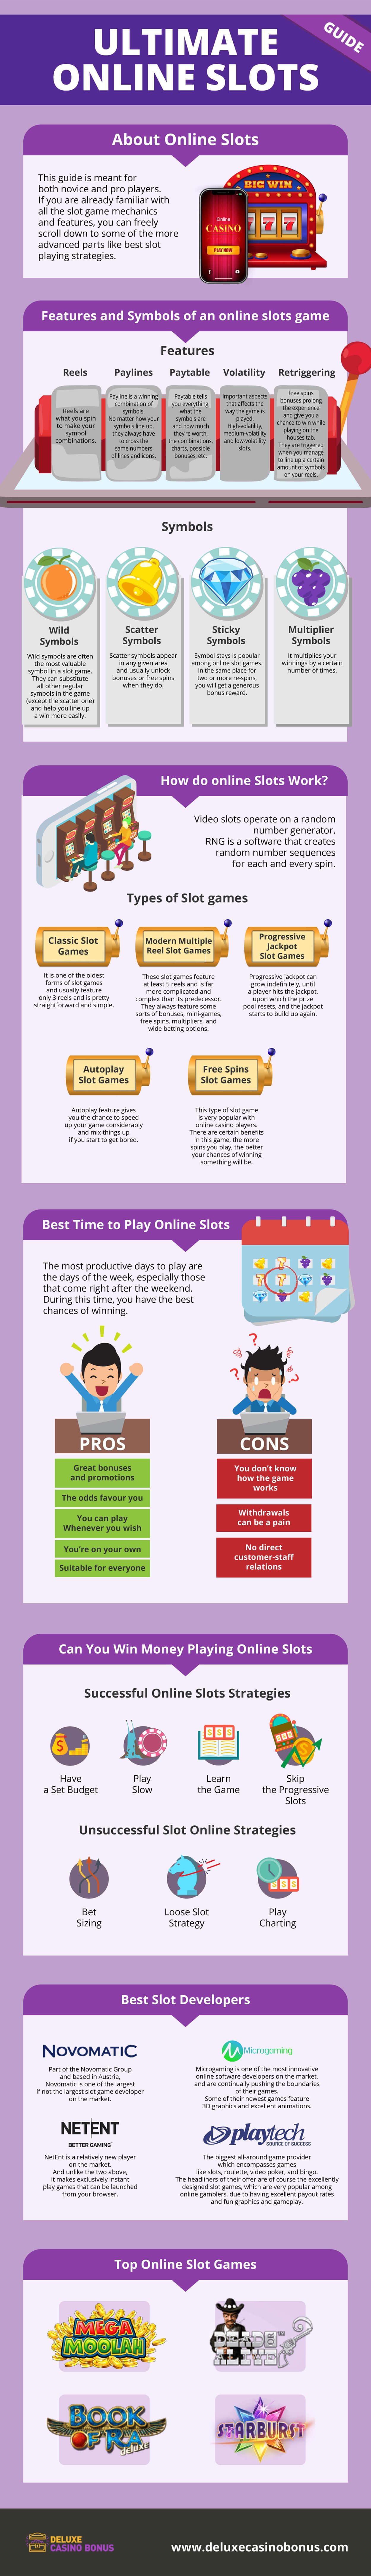 Ultimate Online Slots Guide From Deluxe Casino Bonus Infographic